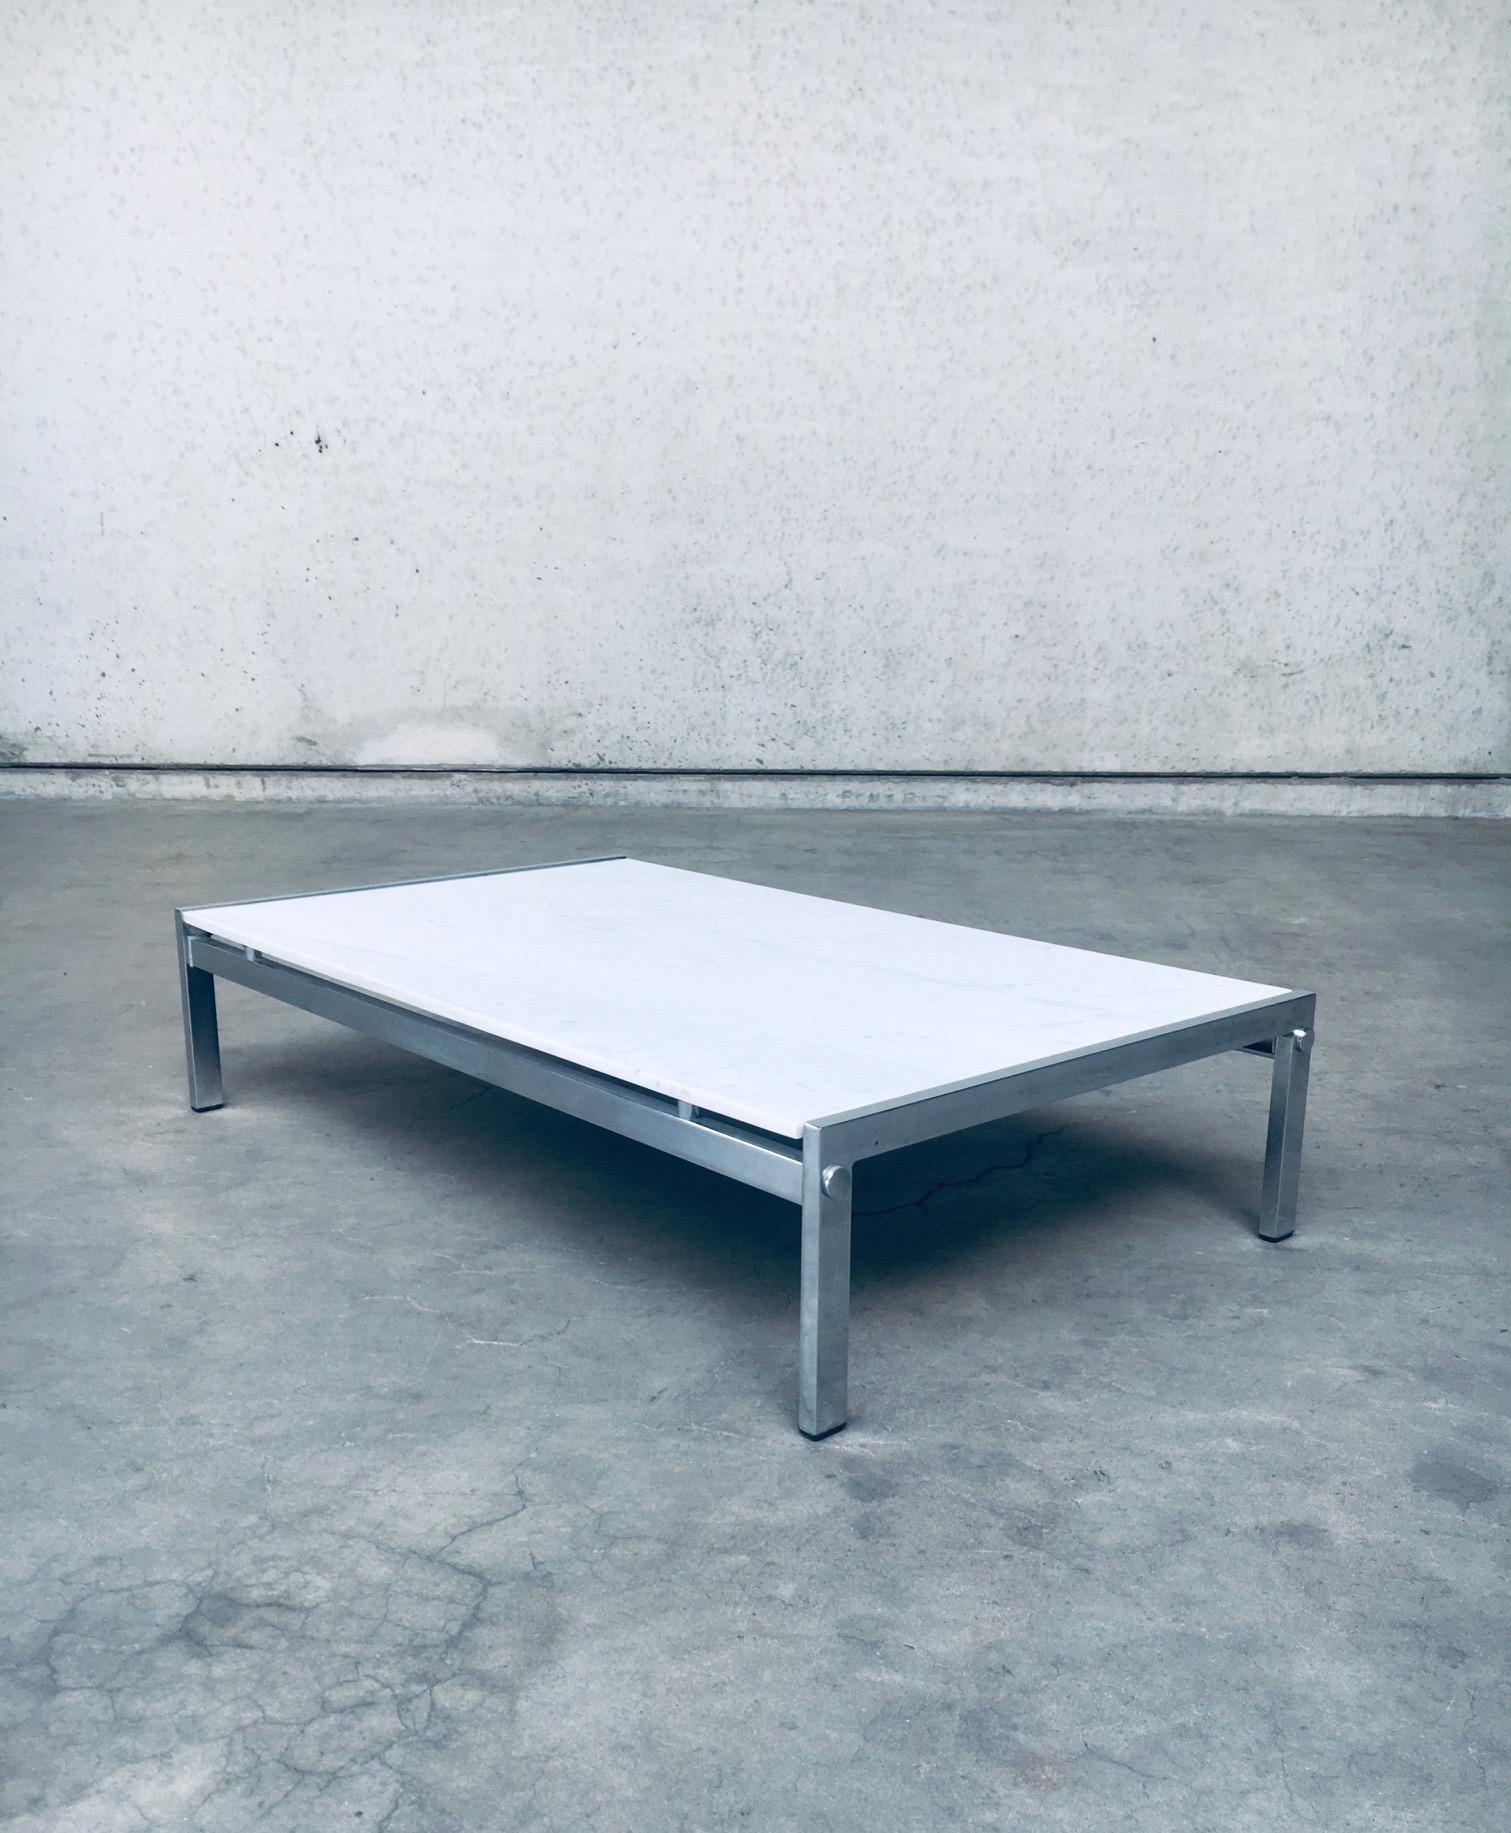 Vintage Postmodern Italian Design Low Coffee Table in Carrara Marble, made in Italy 1970's. Chrome metal base with carrara marble top. Sleek Minimalist in design. In very good original condition. Measures 26cm x 116cm x 68cm.